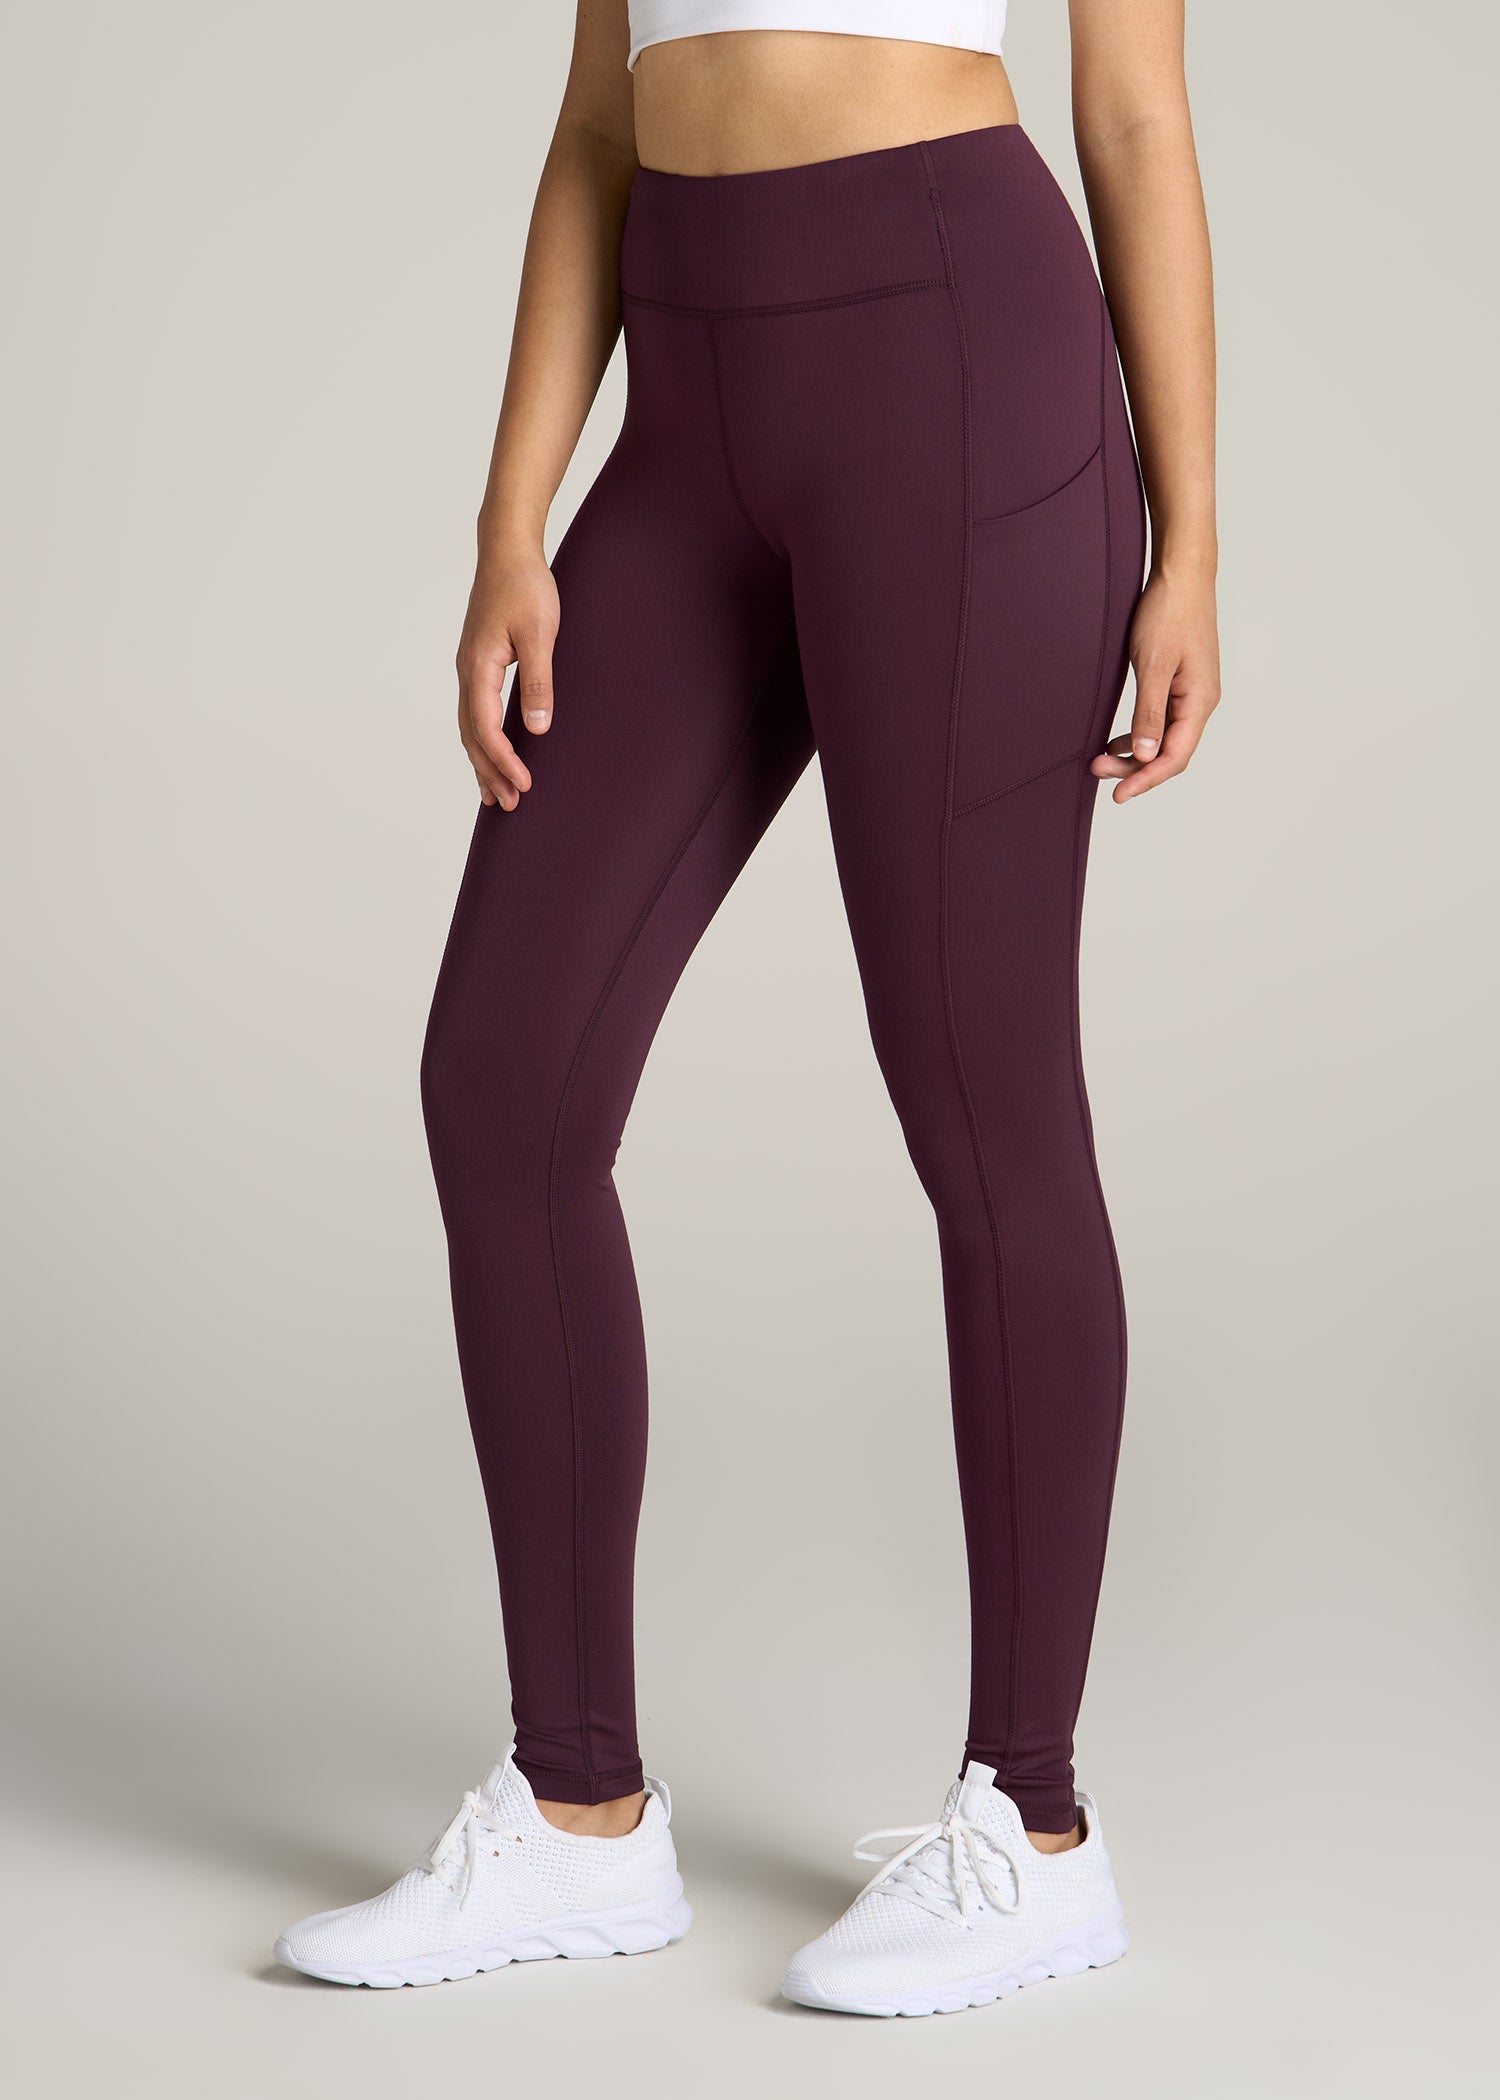 Leggings with pockets – Garden City Grocer